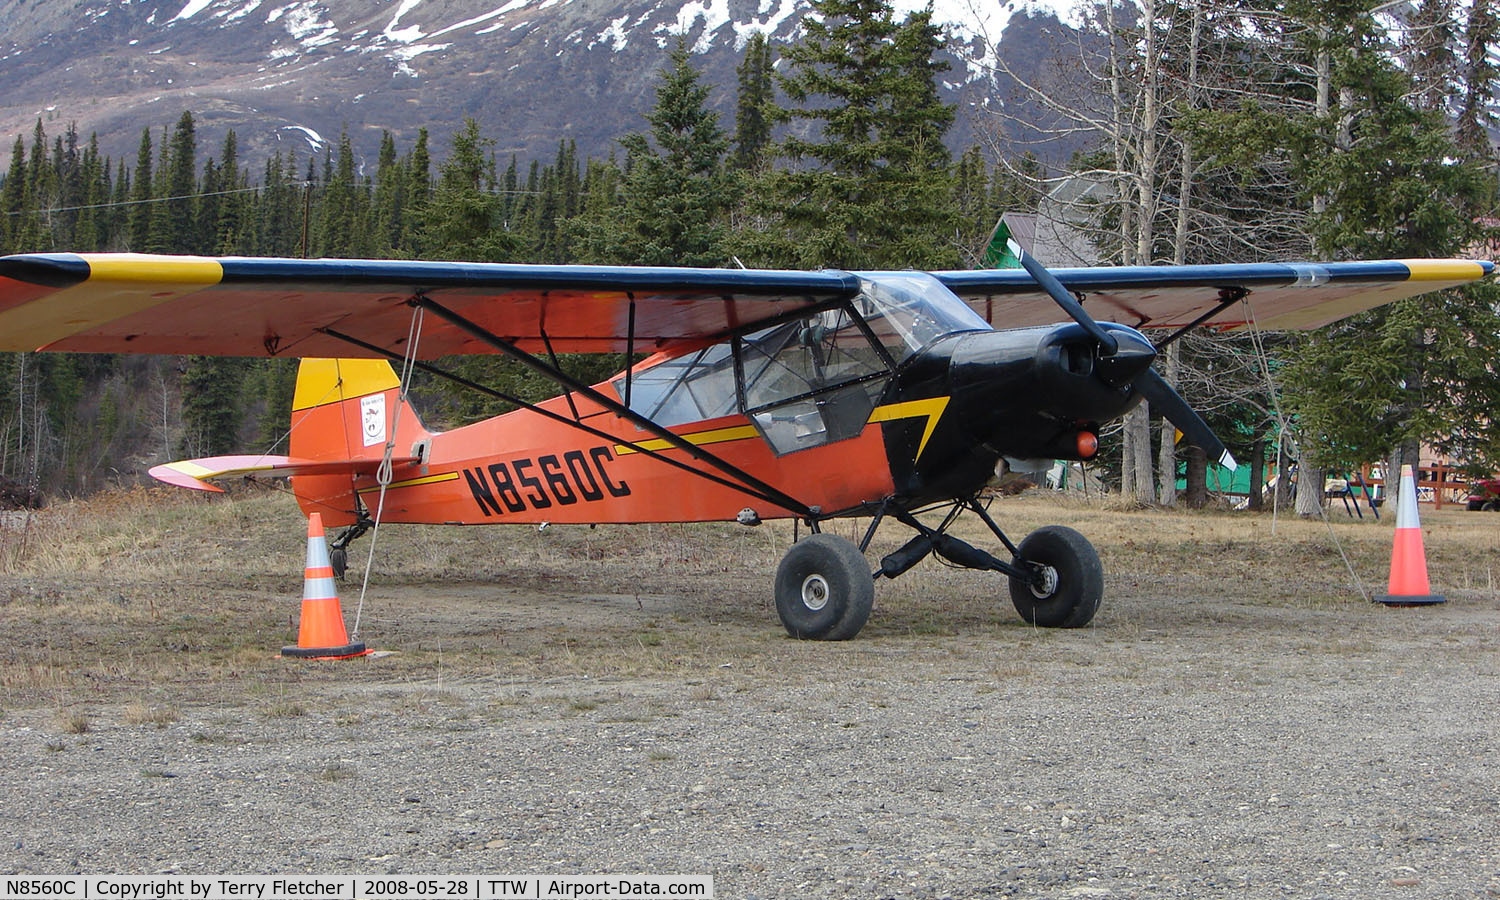 N8560C, 1953 Piper PA-18 C/N 18-2713, 1953 Piper Pa-18 of Atkins Flying Services of Cantwell AK